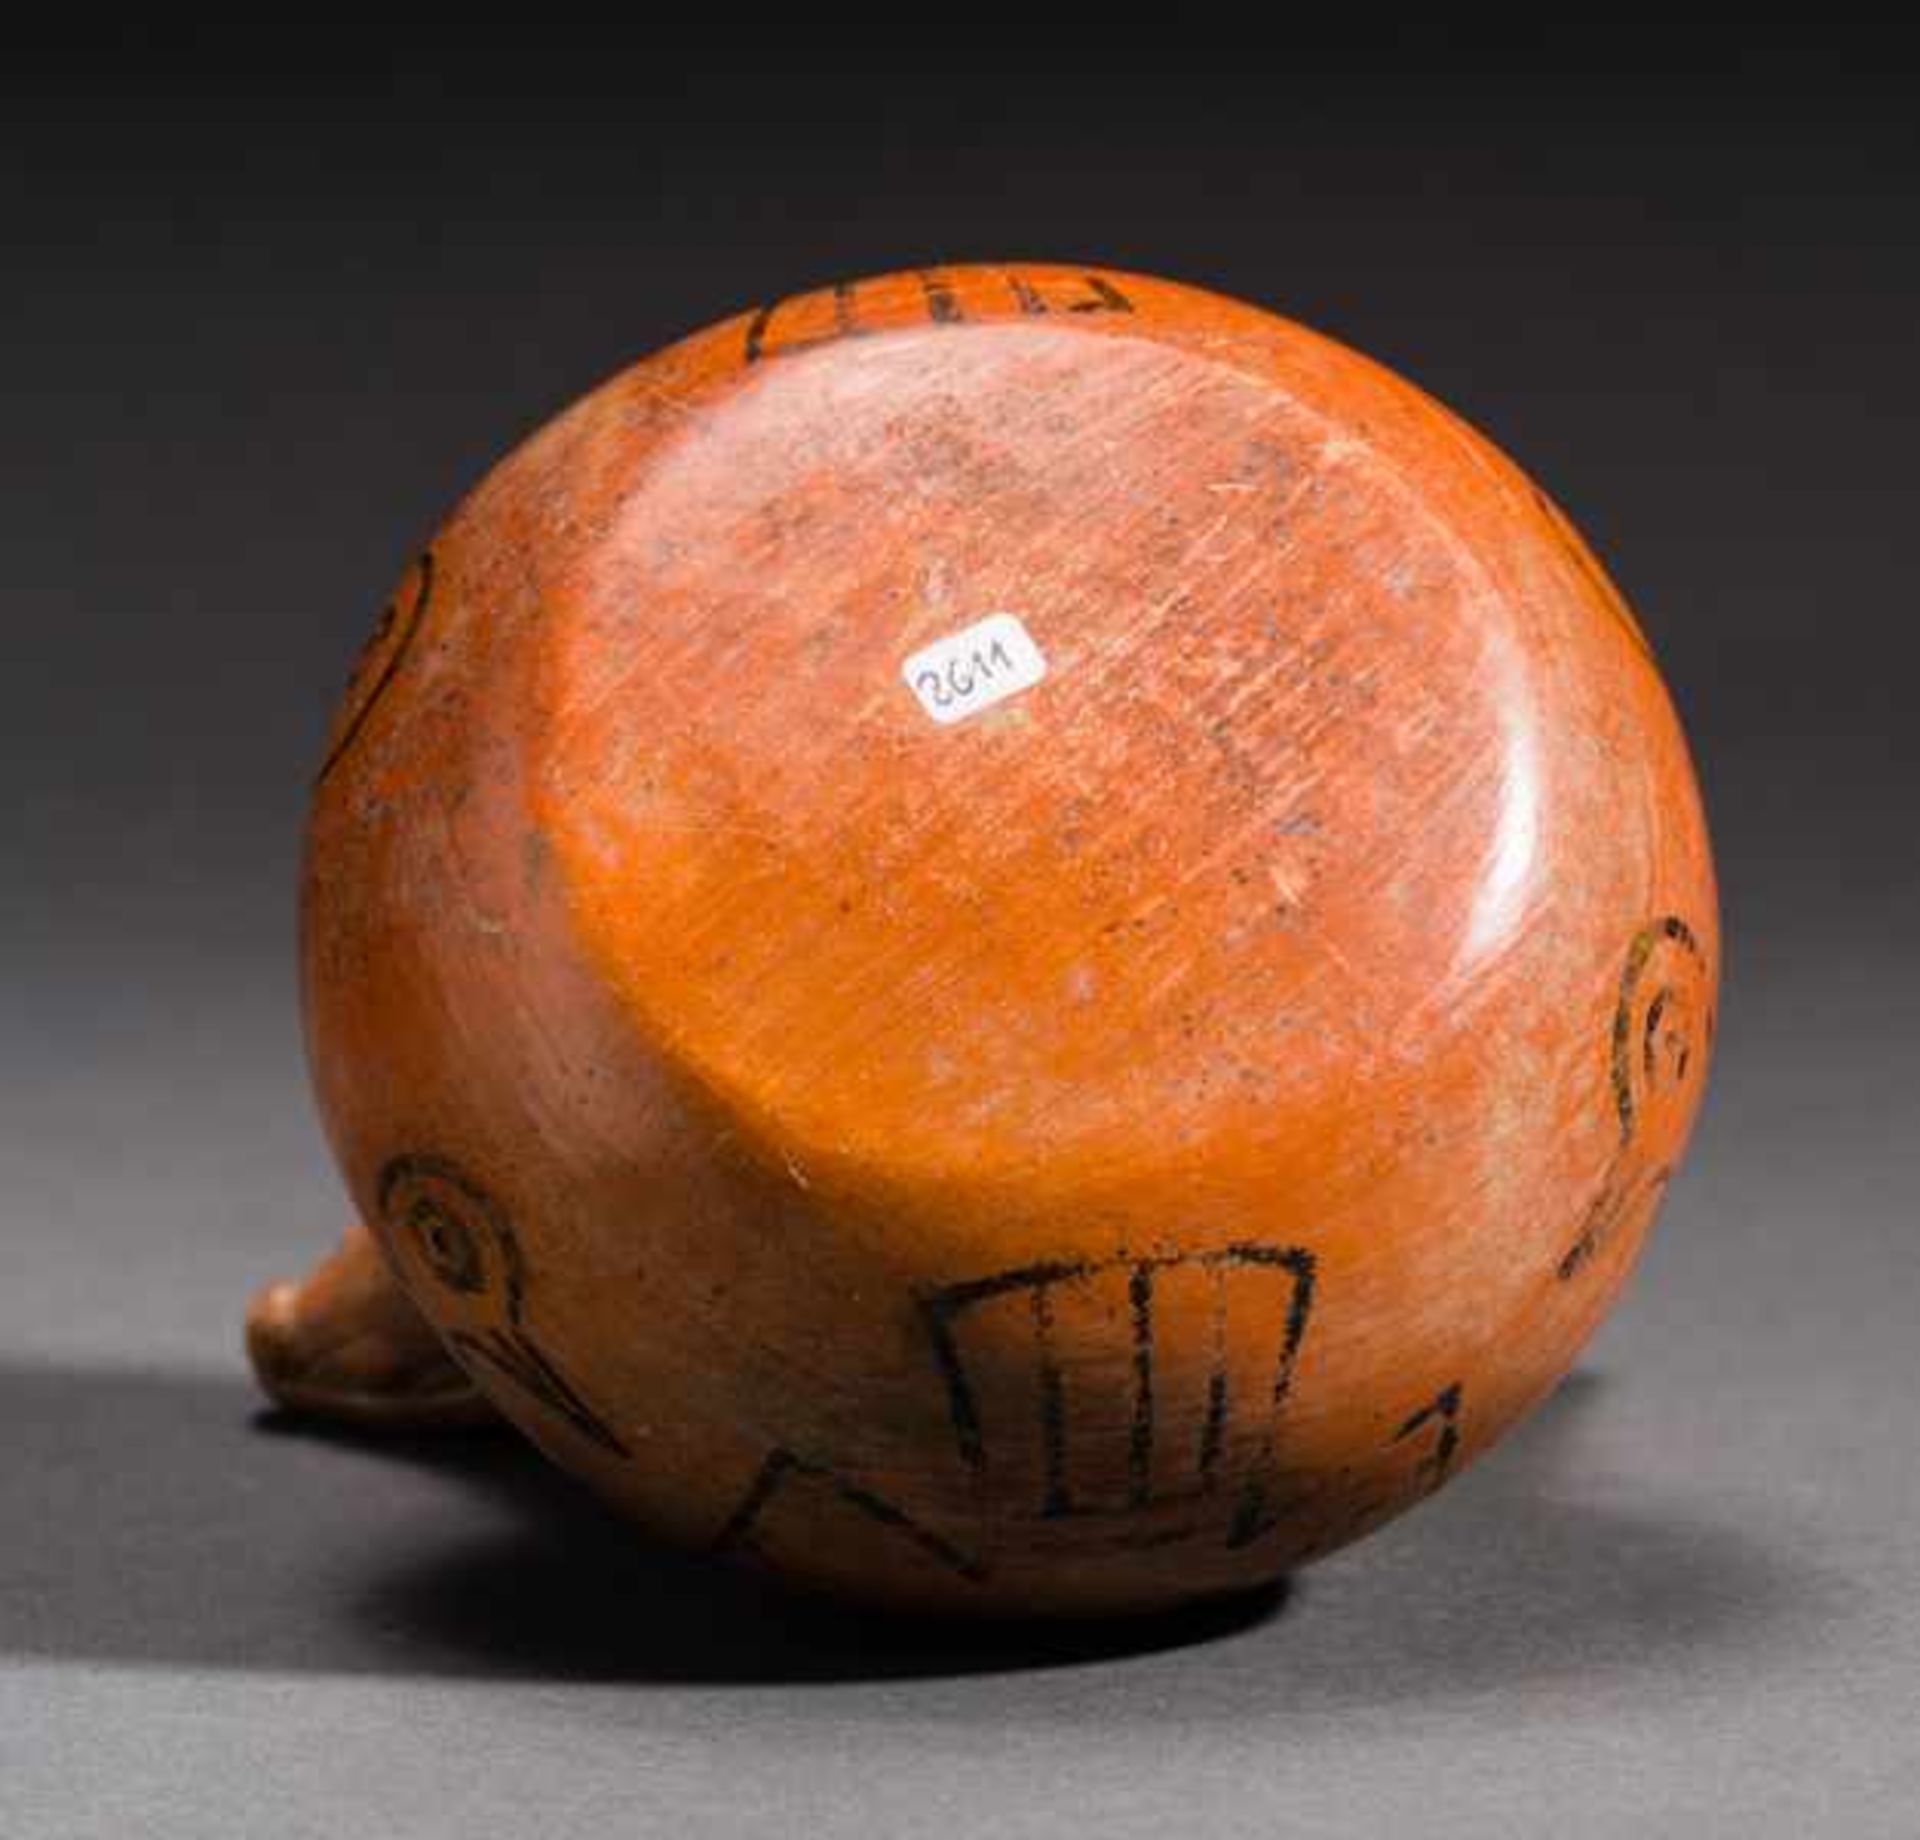 PIPE VESSEL WITH AVIARY DECORATION Terracotta and pain. Salinar, ca. 300 anteSpherical vessel with a - Image 4 of 4